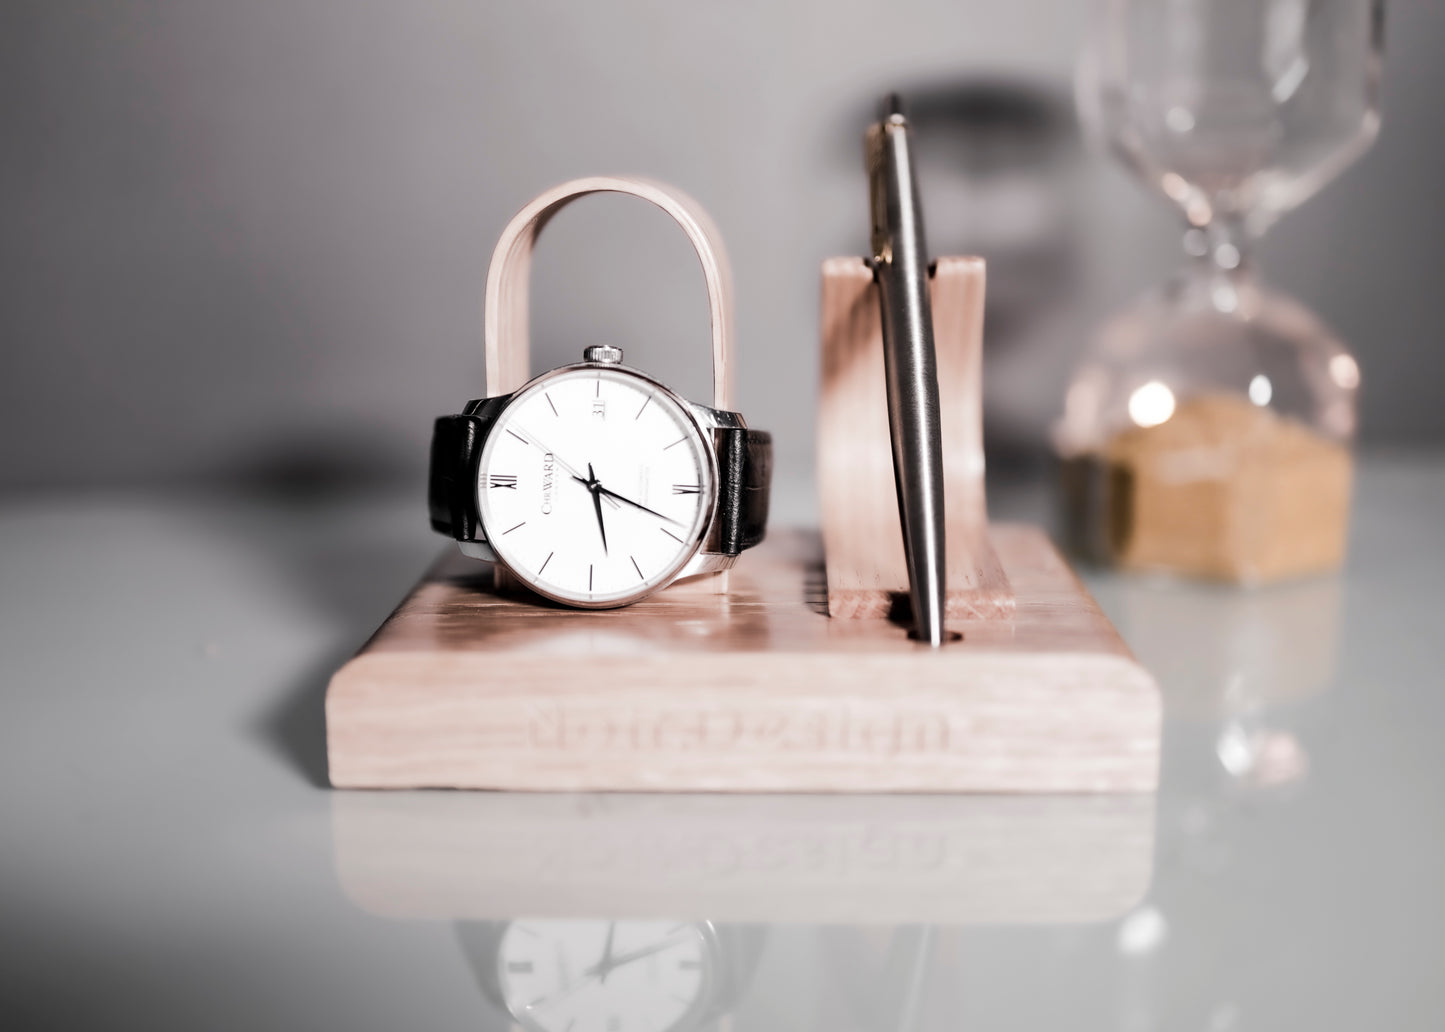 Watch and Pen Stand Display - Oak